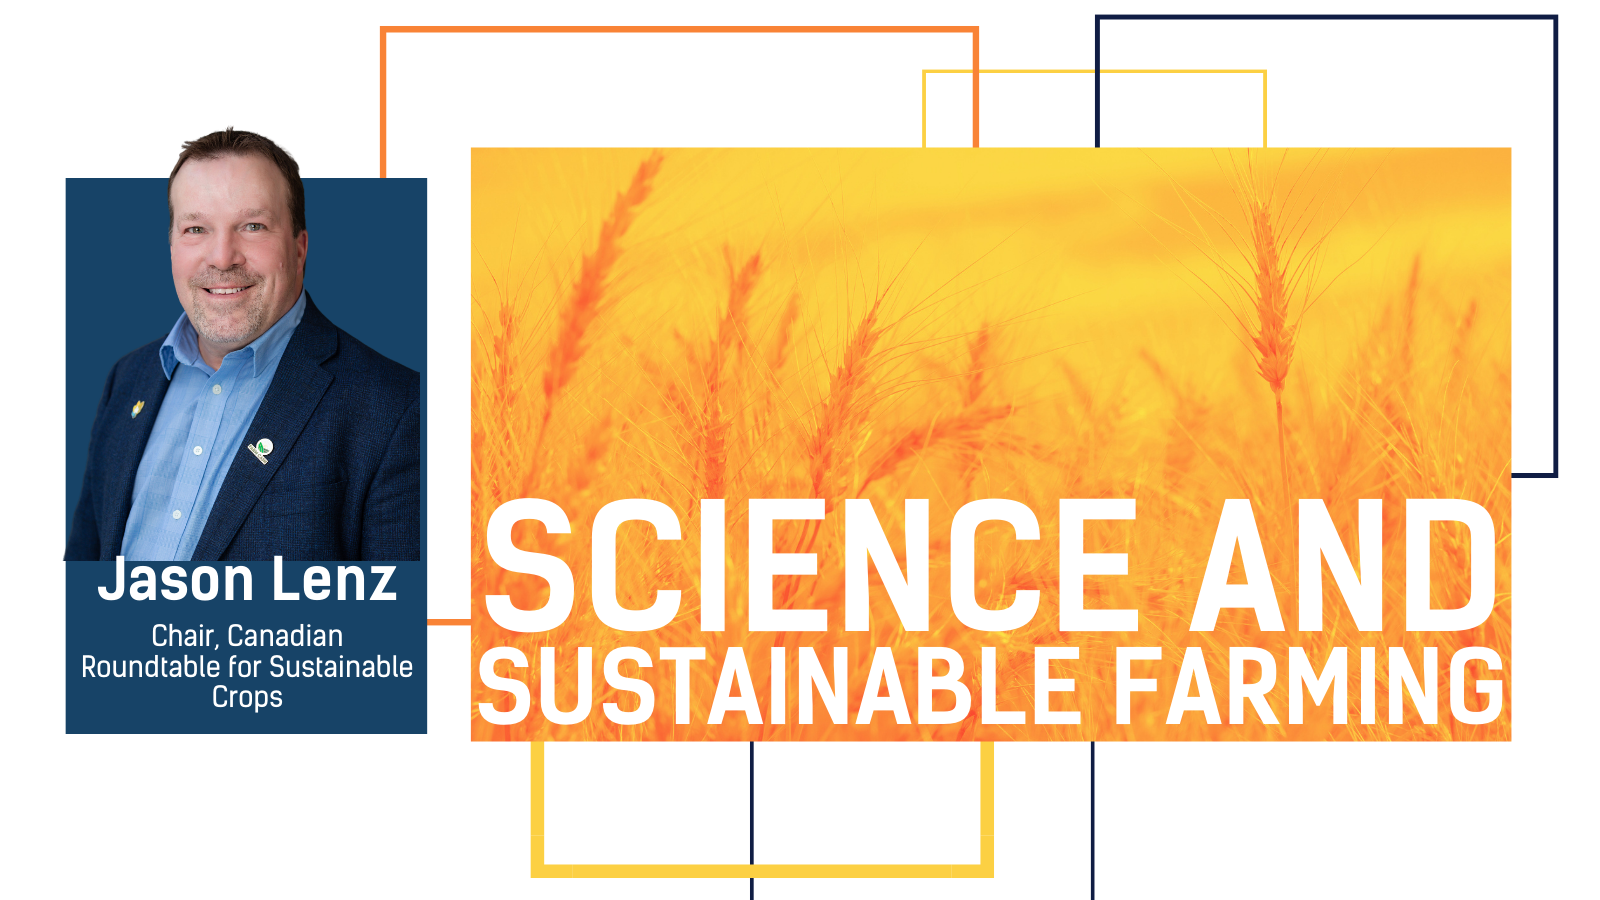 a banner with the title "Science and sustainable farming" with a photo of a wheat field and the headshot of a white man